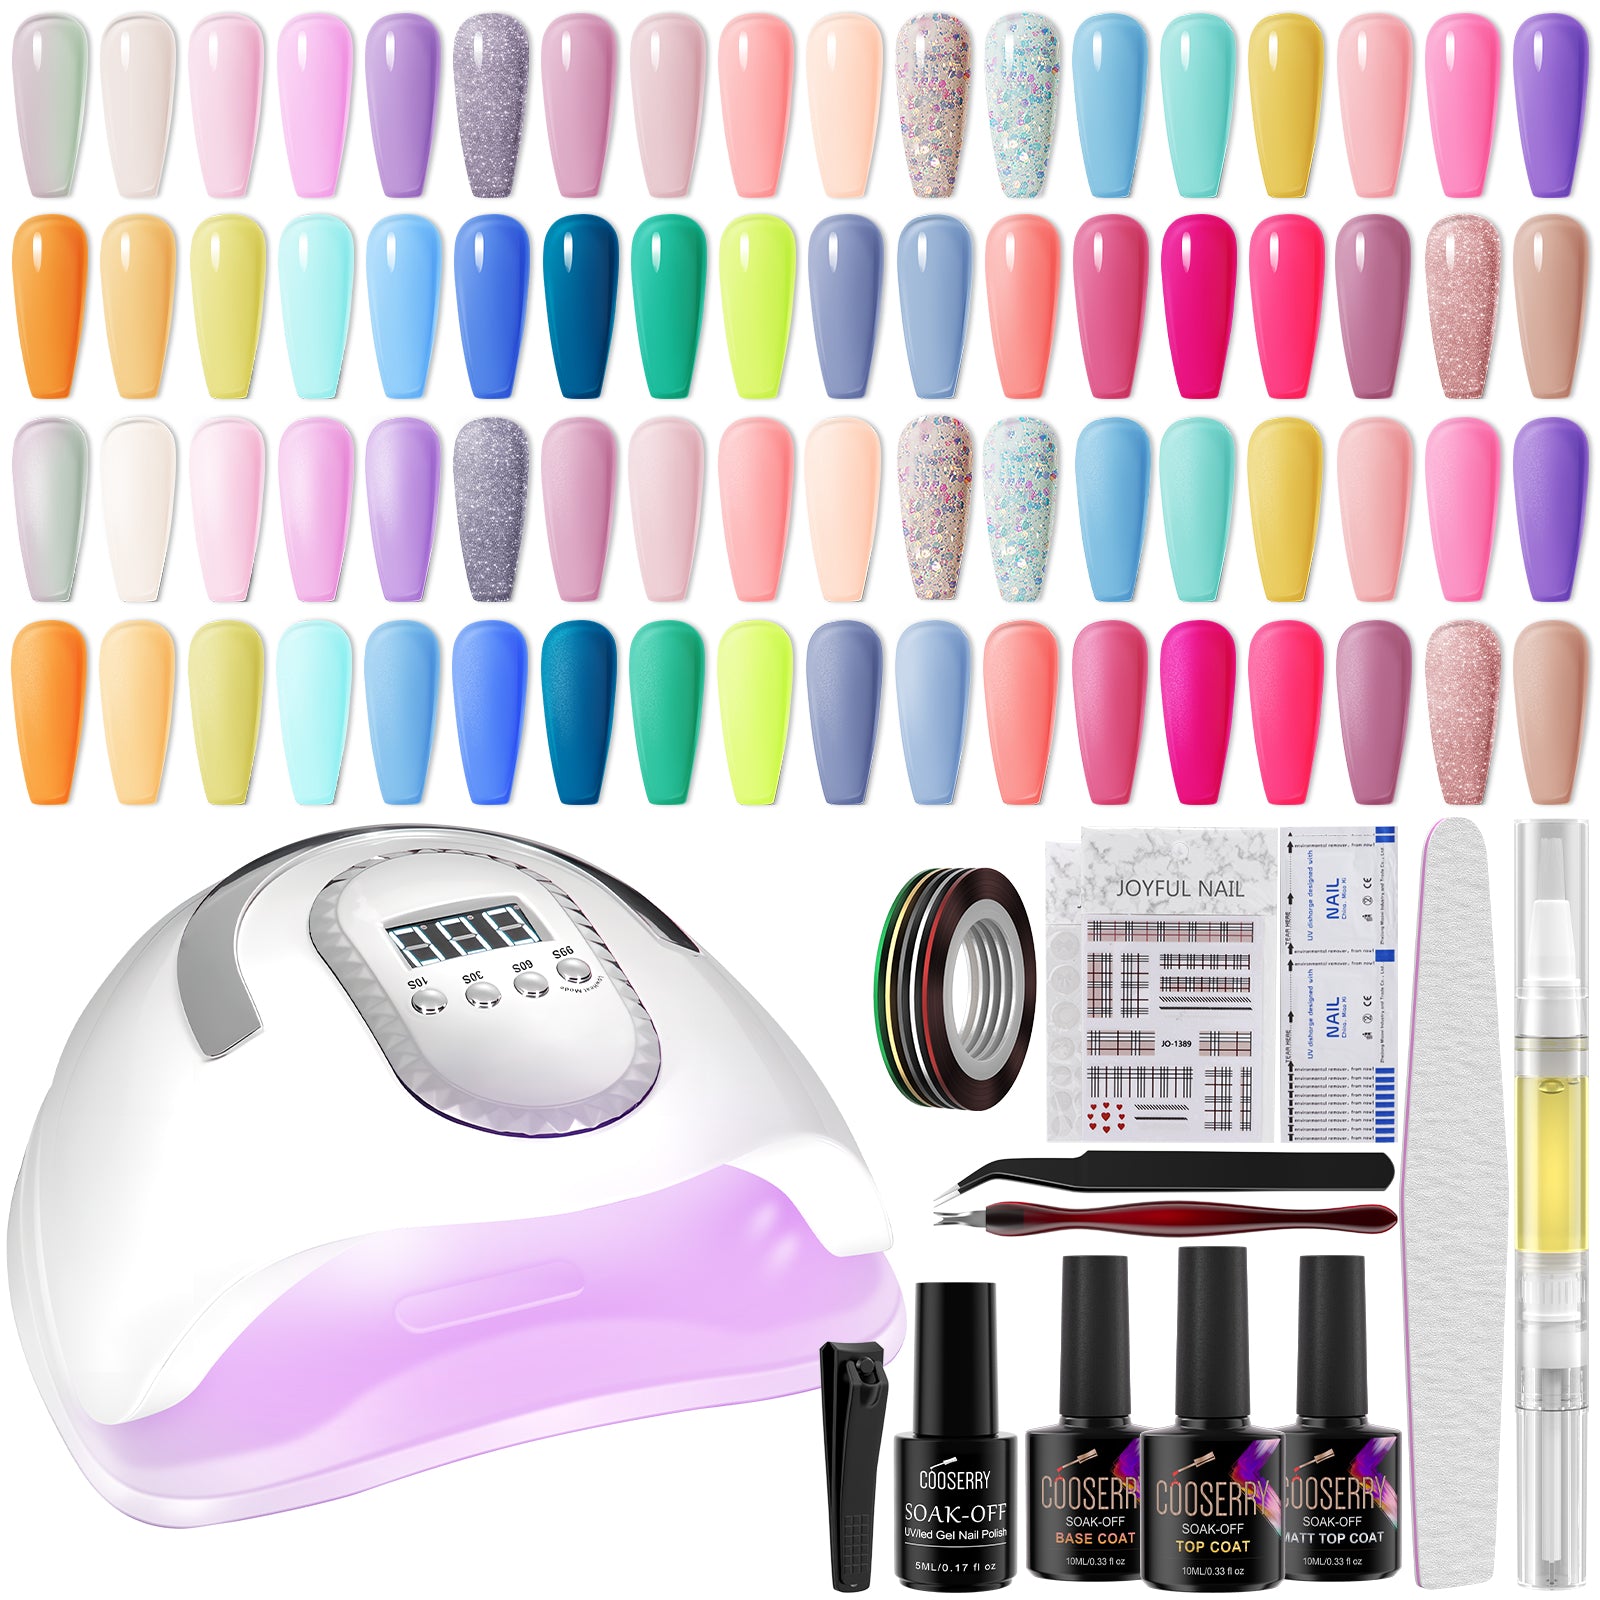 Mylee Black Convex Curing Lamp Kit with Gel Nail Polish Essentials Set -  FREE Delivery